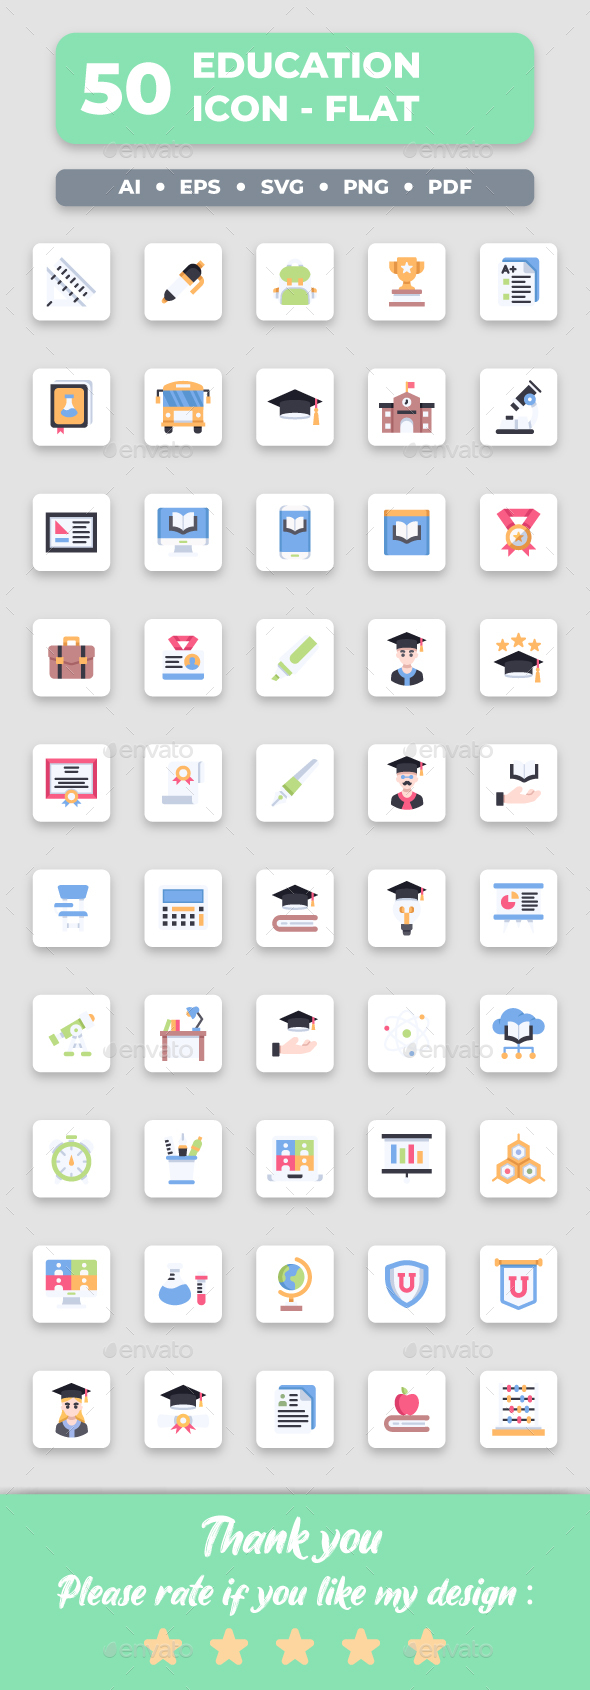 Education - Flat Collection Icon Set